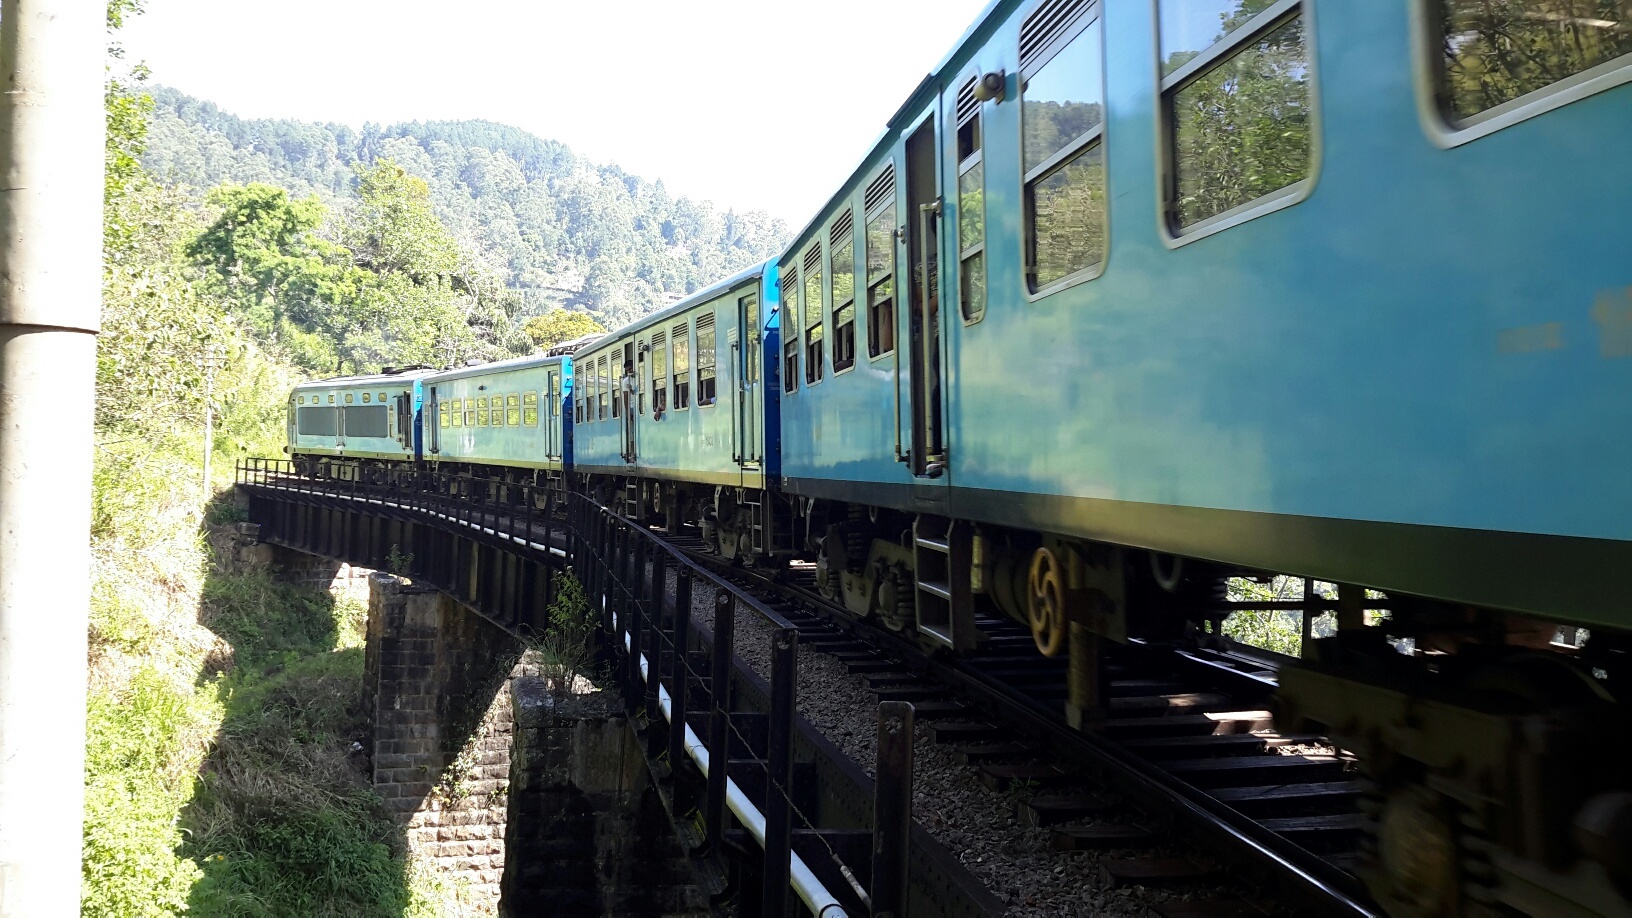 A close-up picture of a blue train on a bridge, with forest in the background.